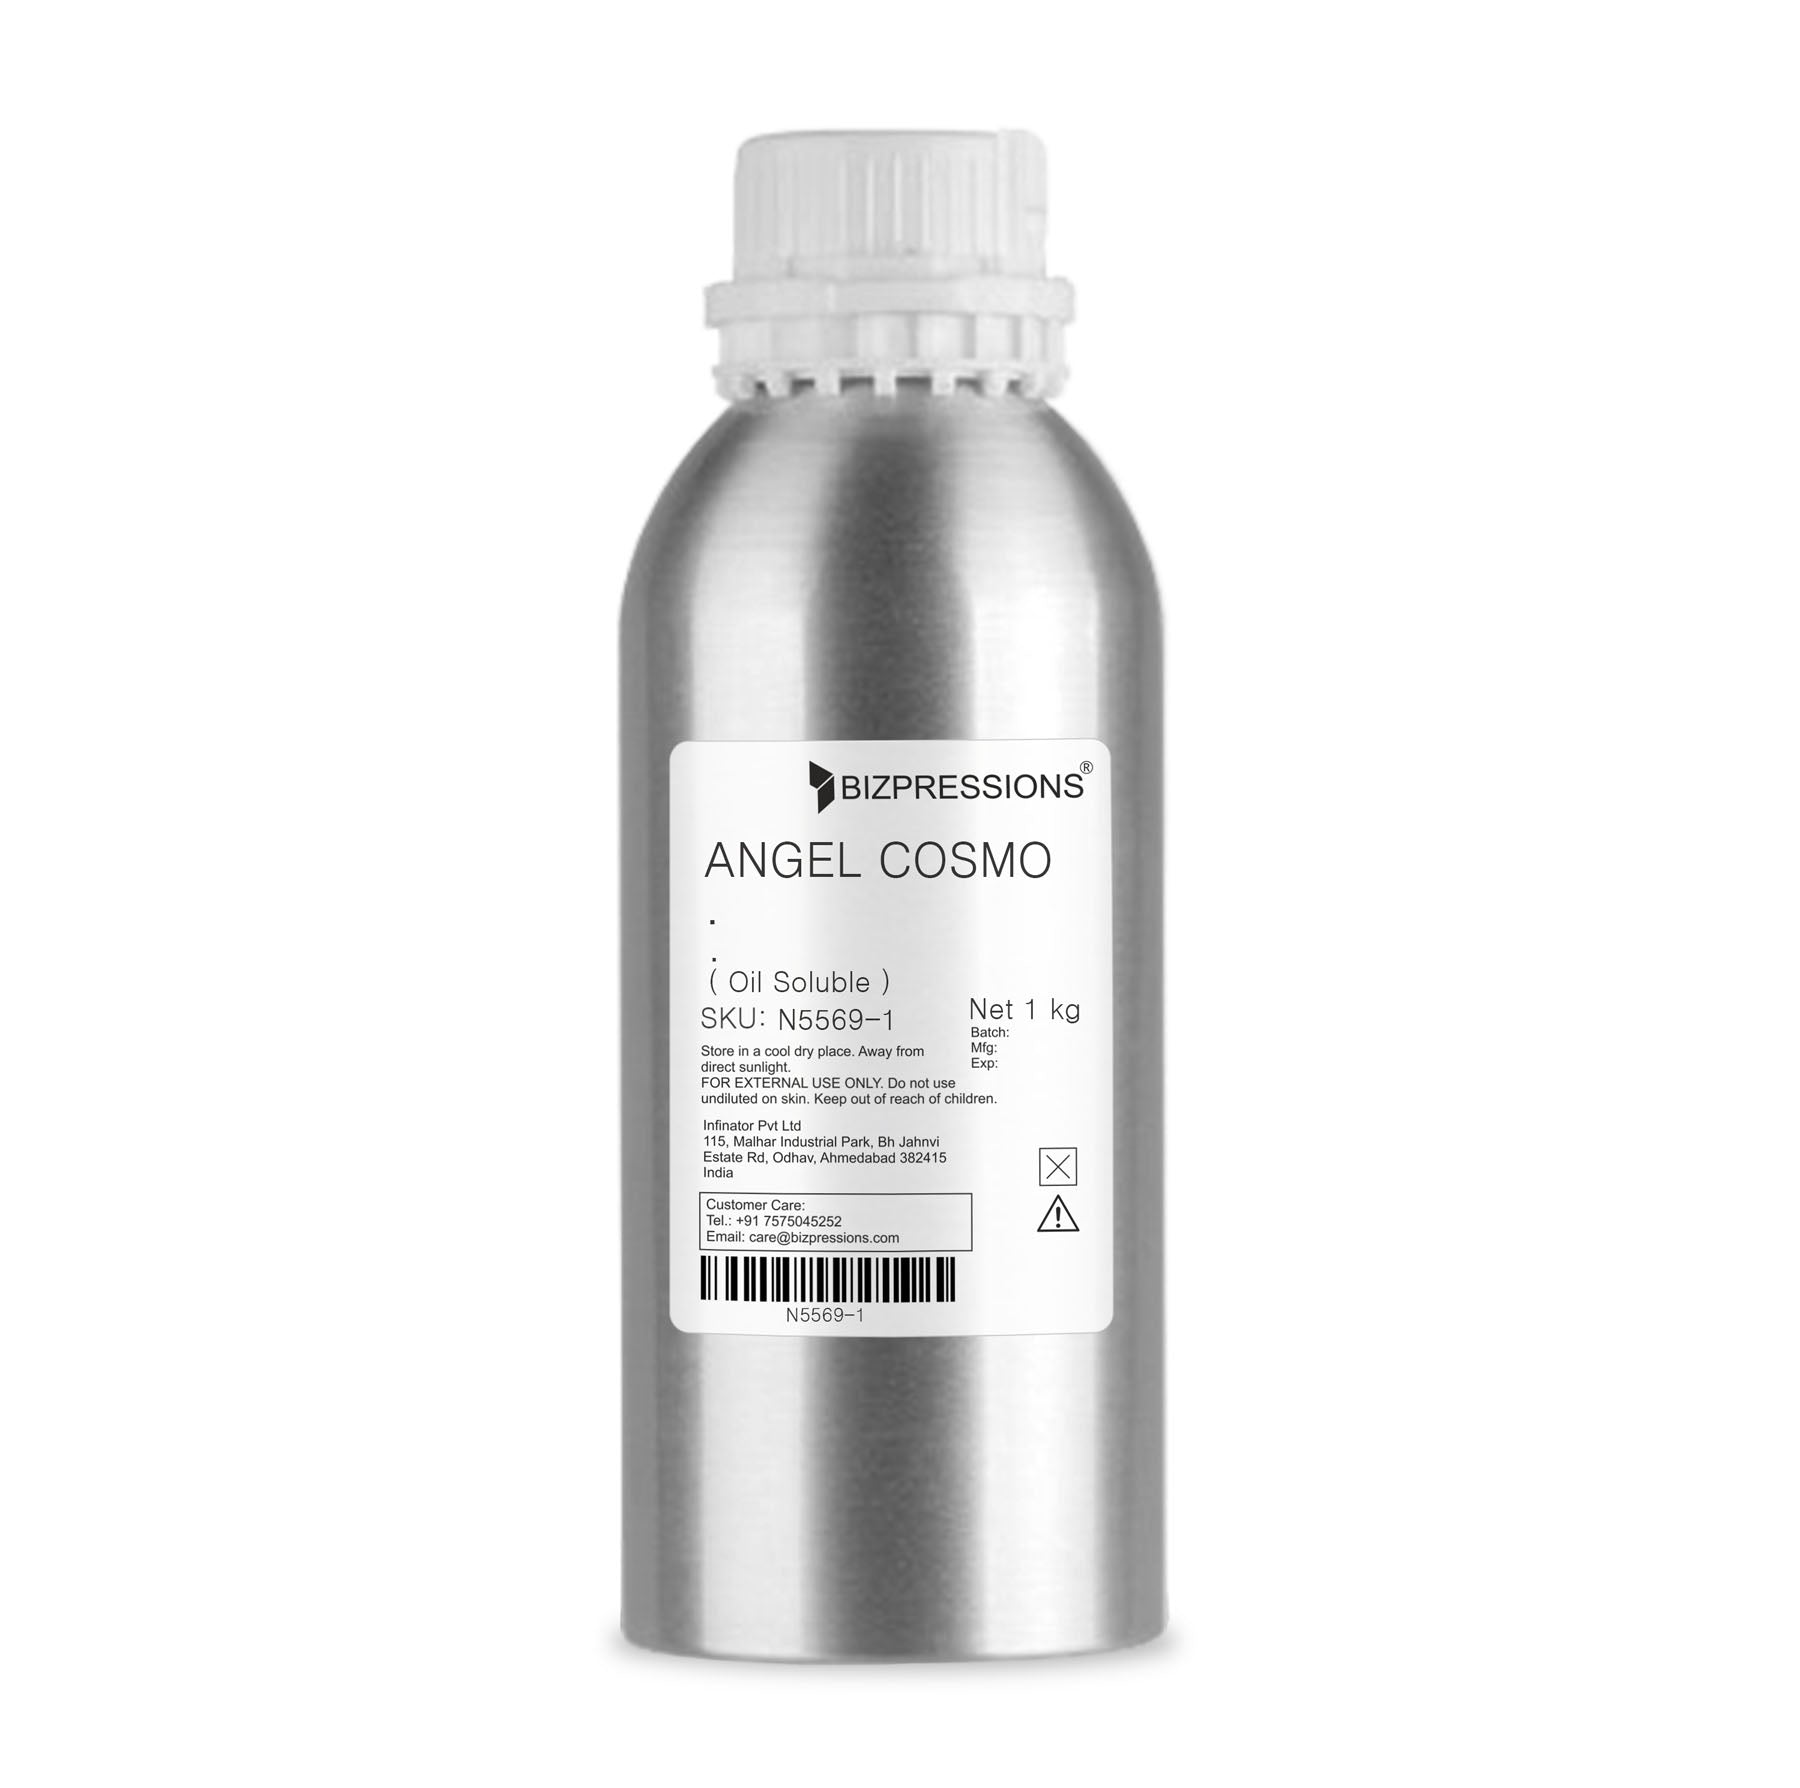 ANGEL COSMO - Fragrance ( Oil Soluble ) - 1 kg